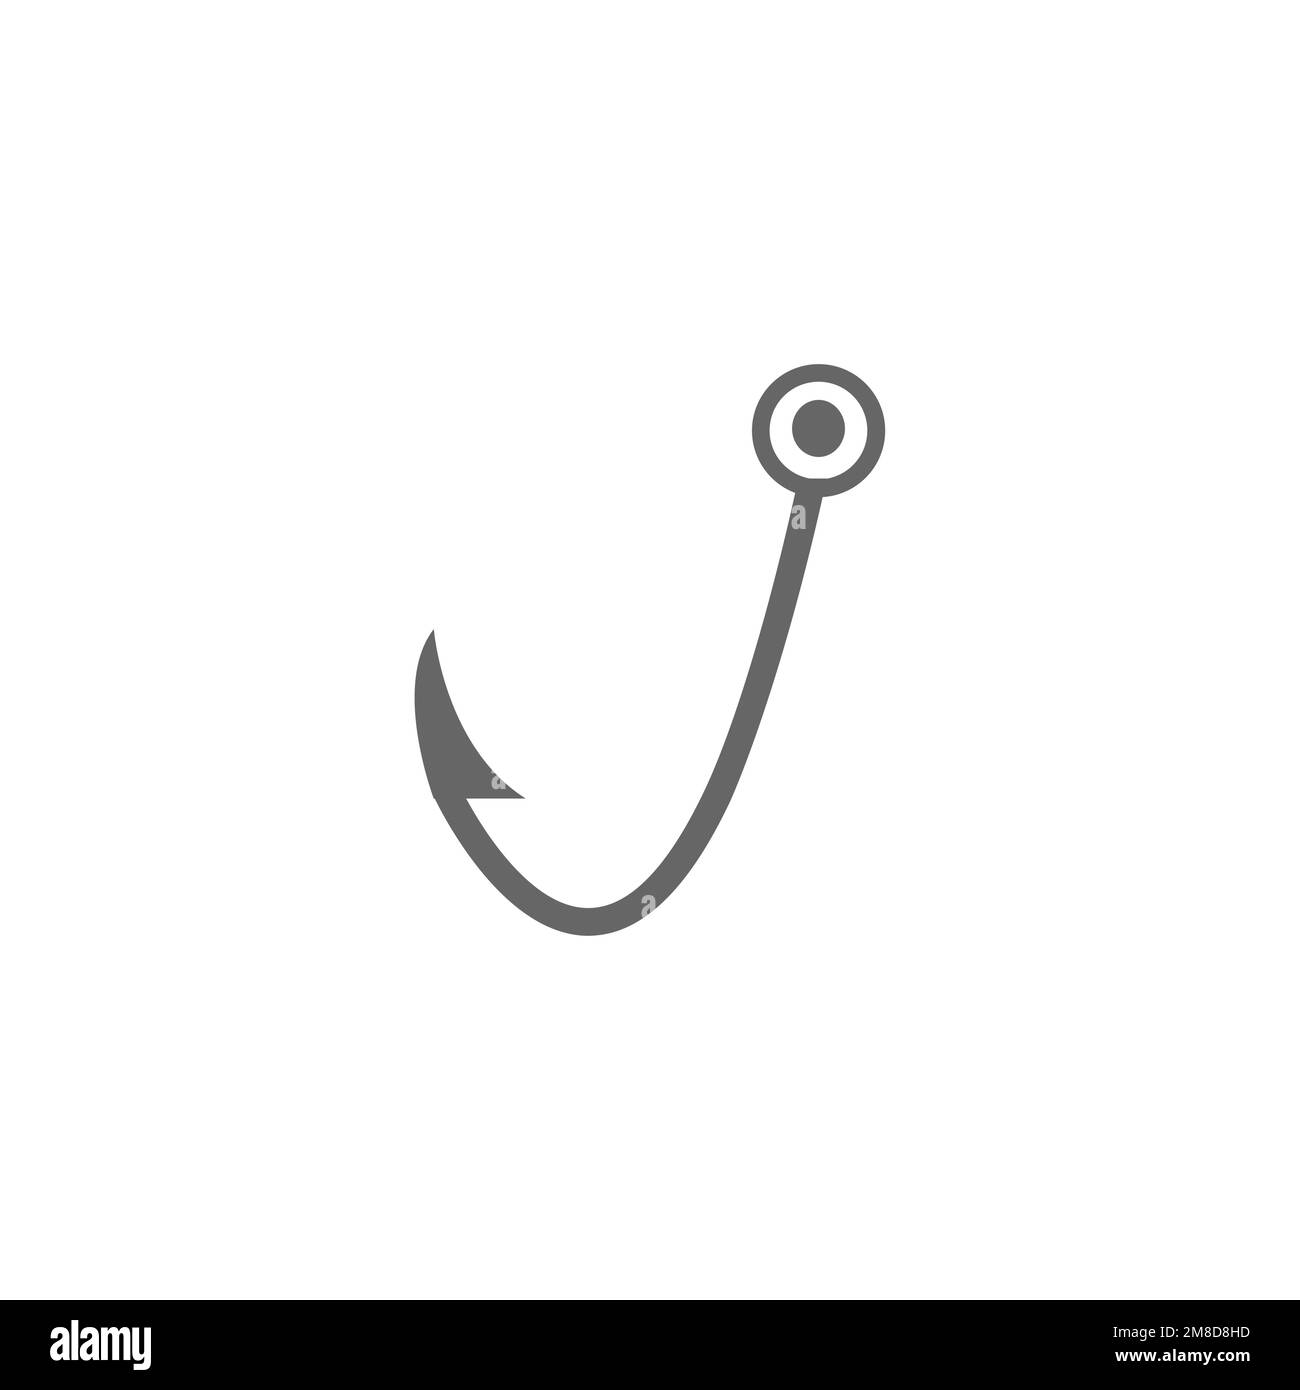 Fish hook icon, common graphic resources, vector illustration